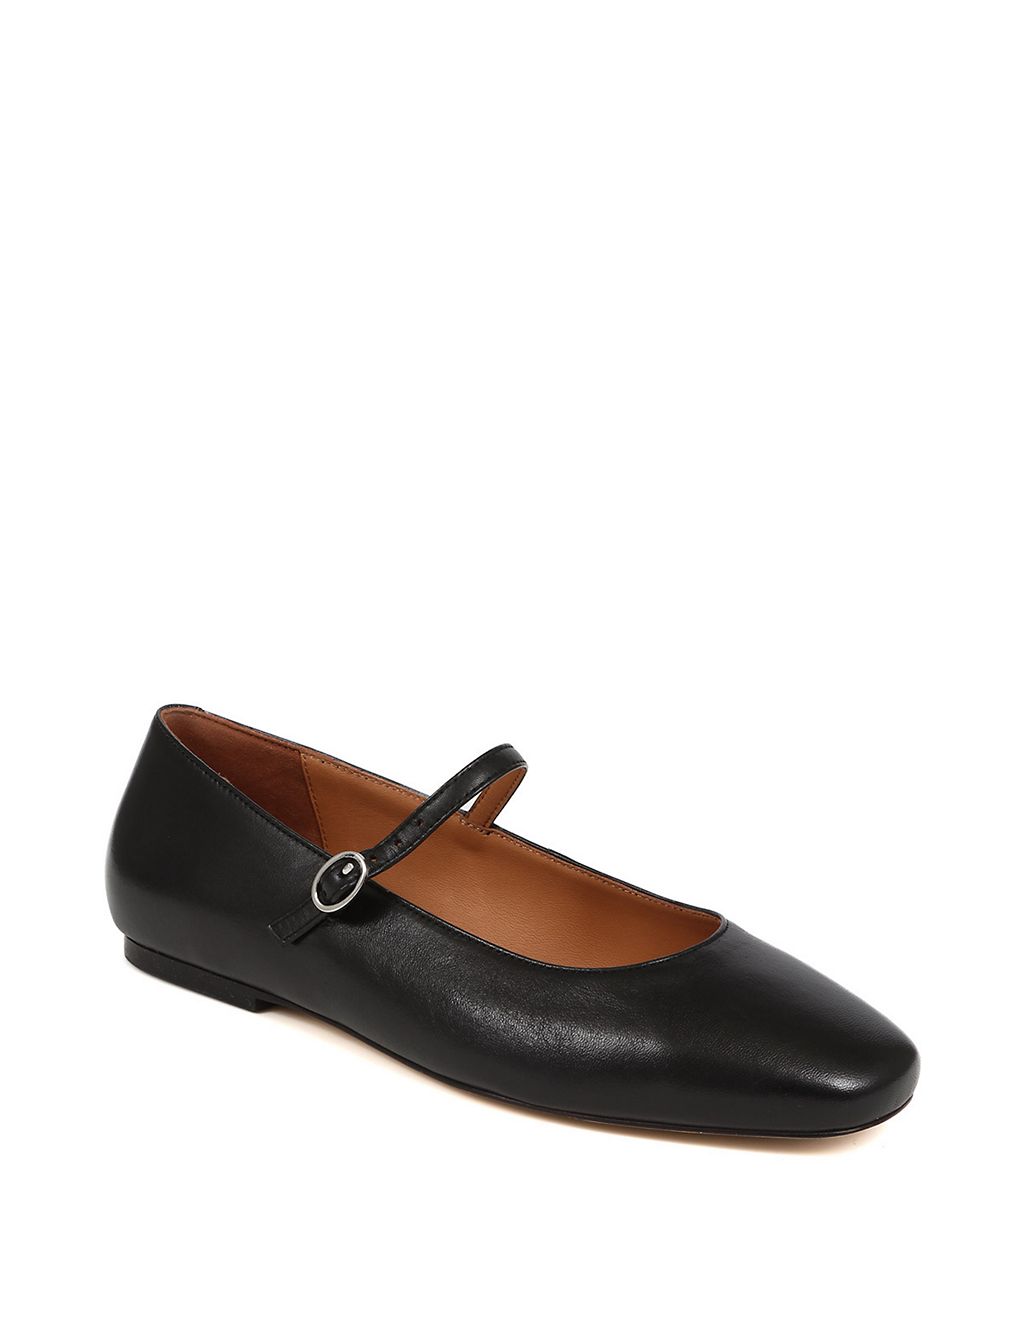 Leather Buckle Flat Pumps 8 of 8